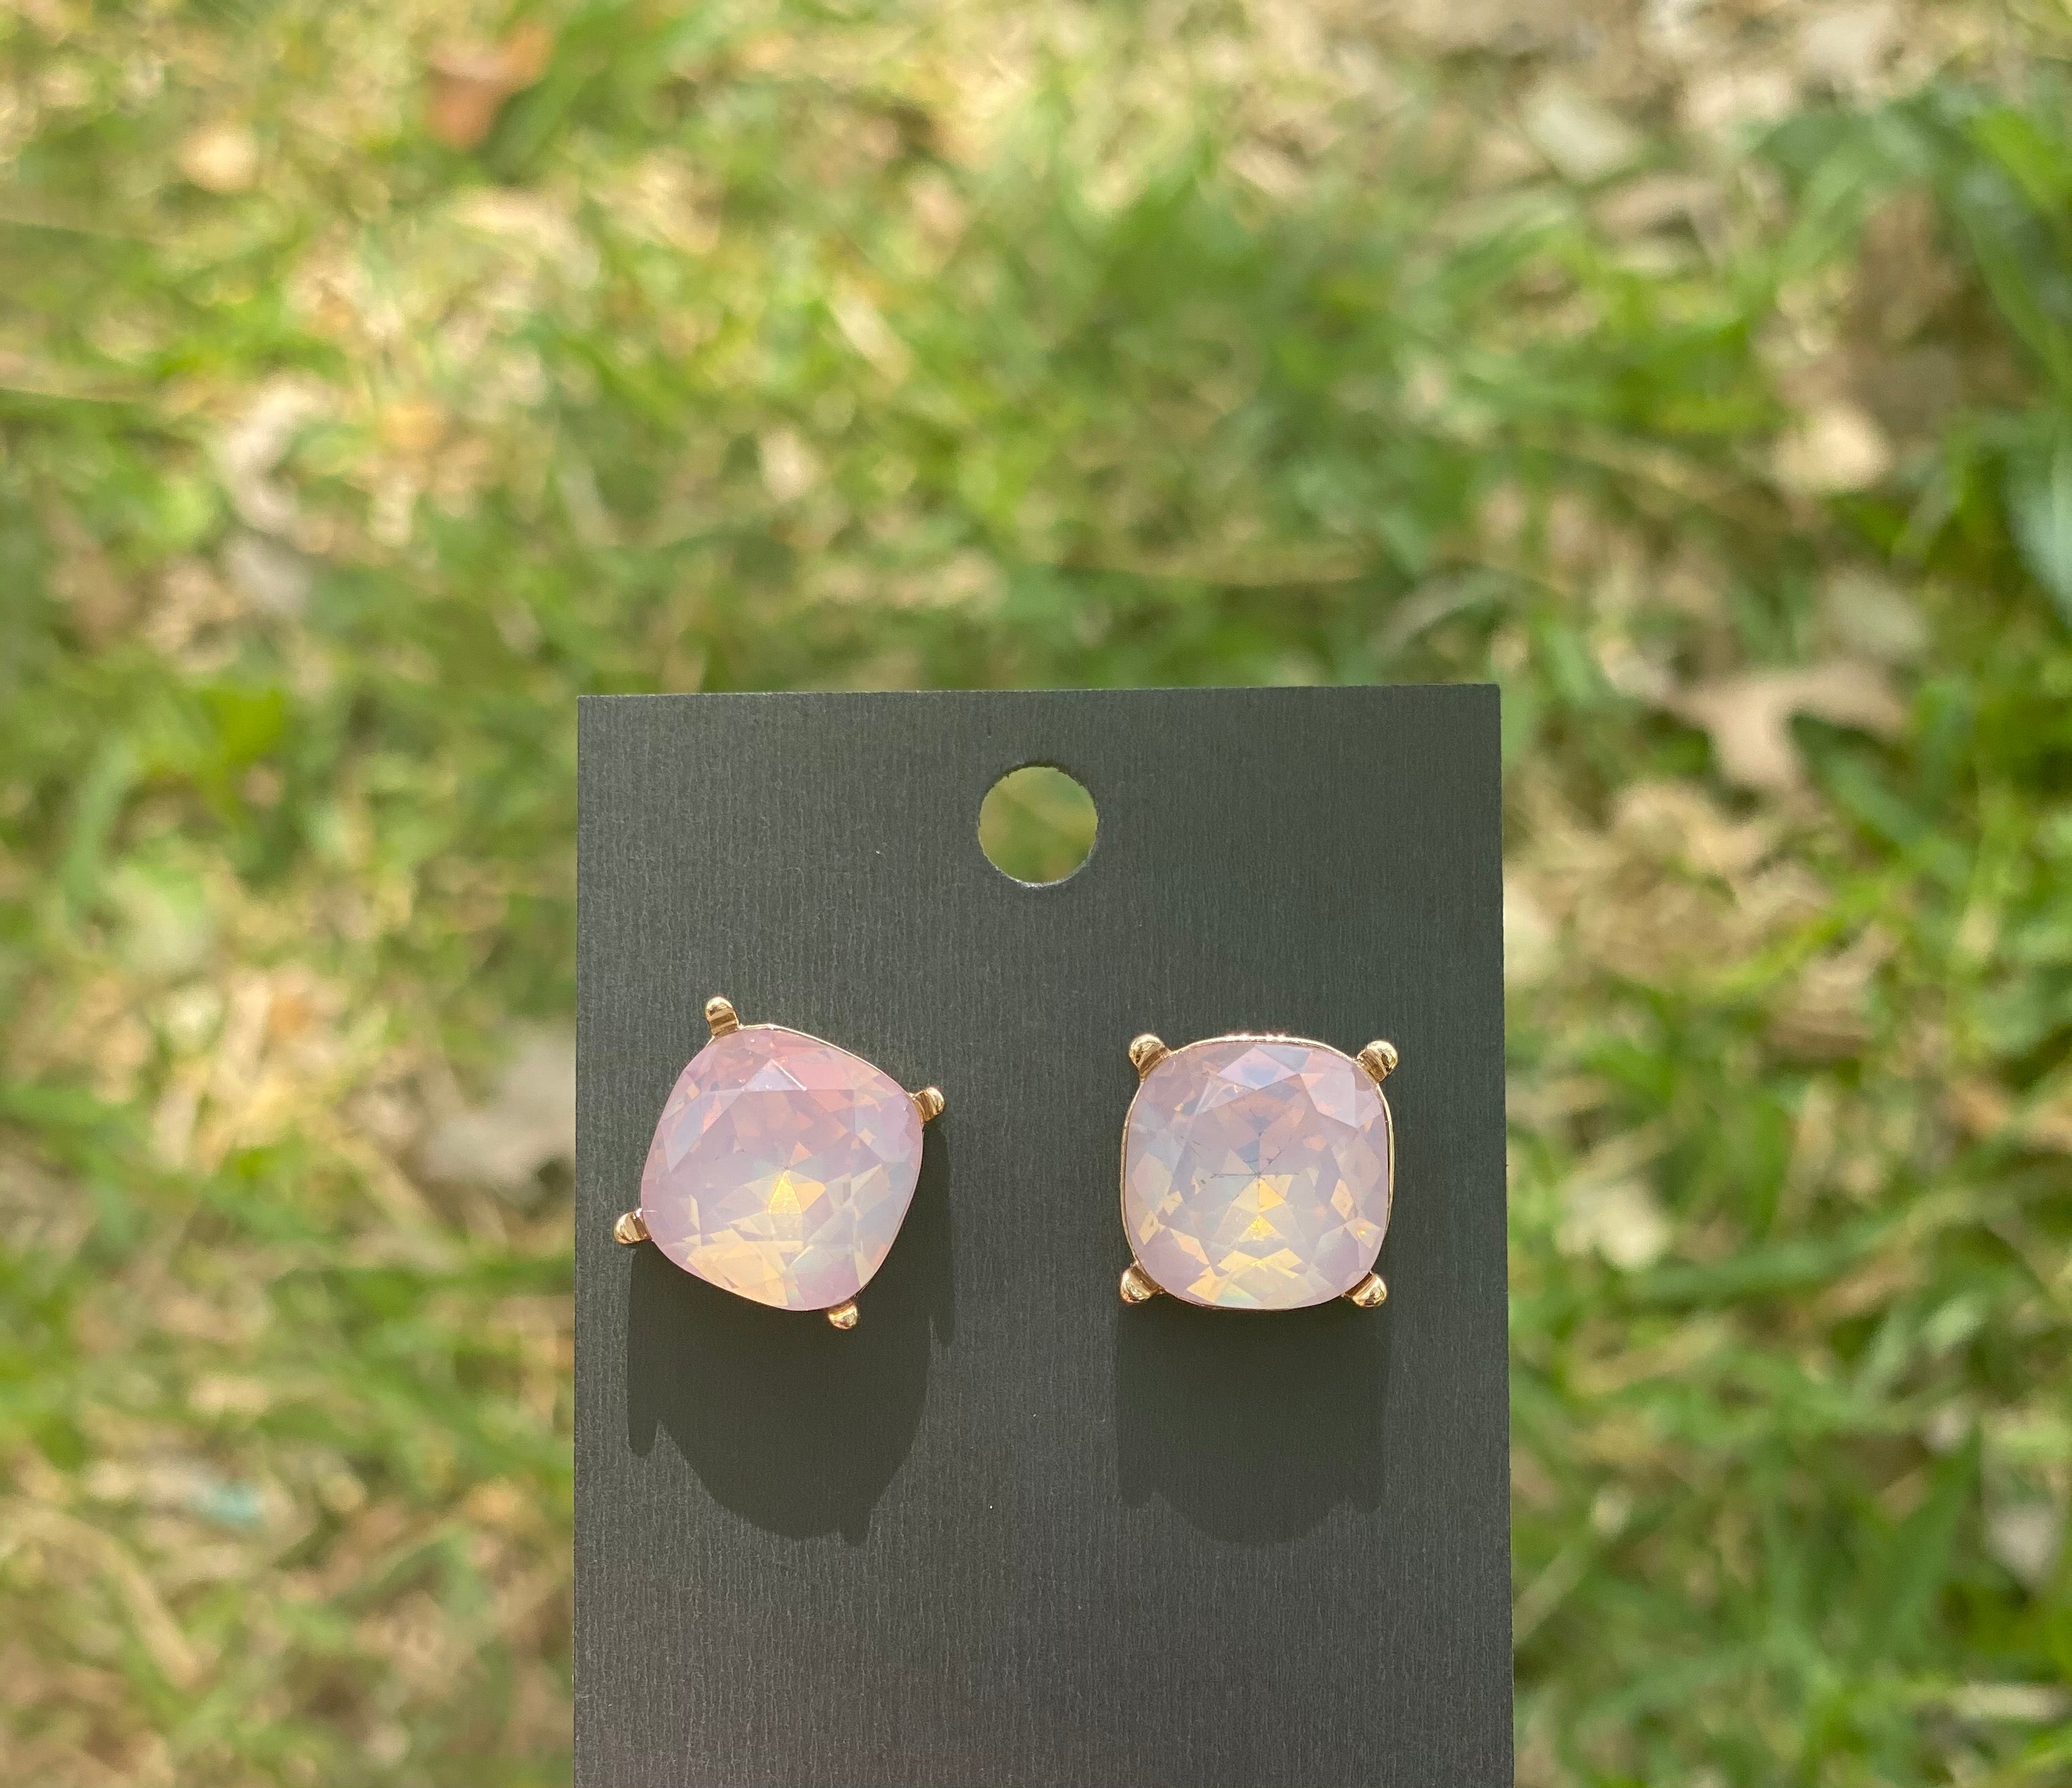 Colored studs